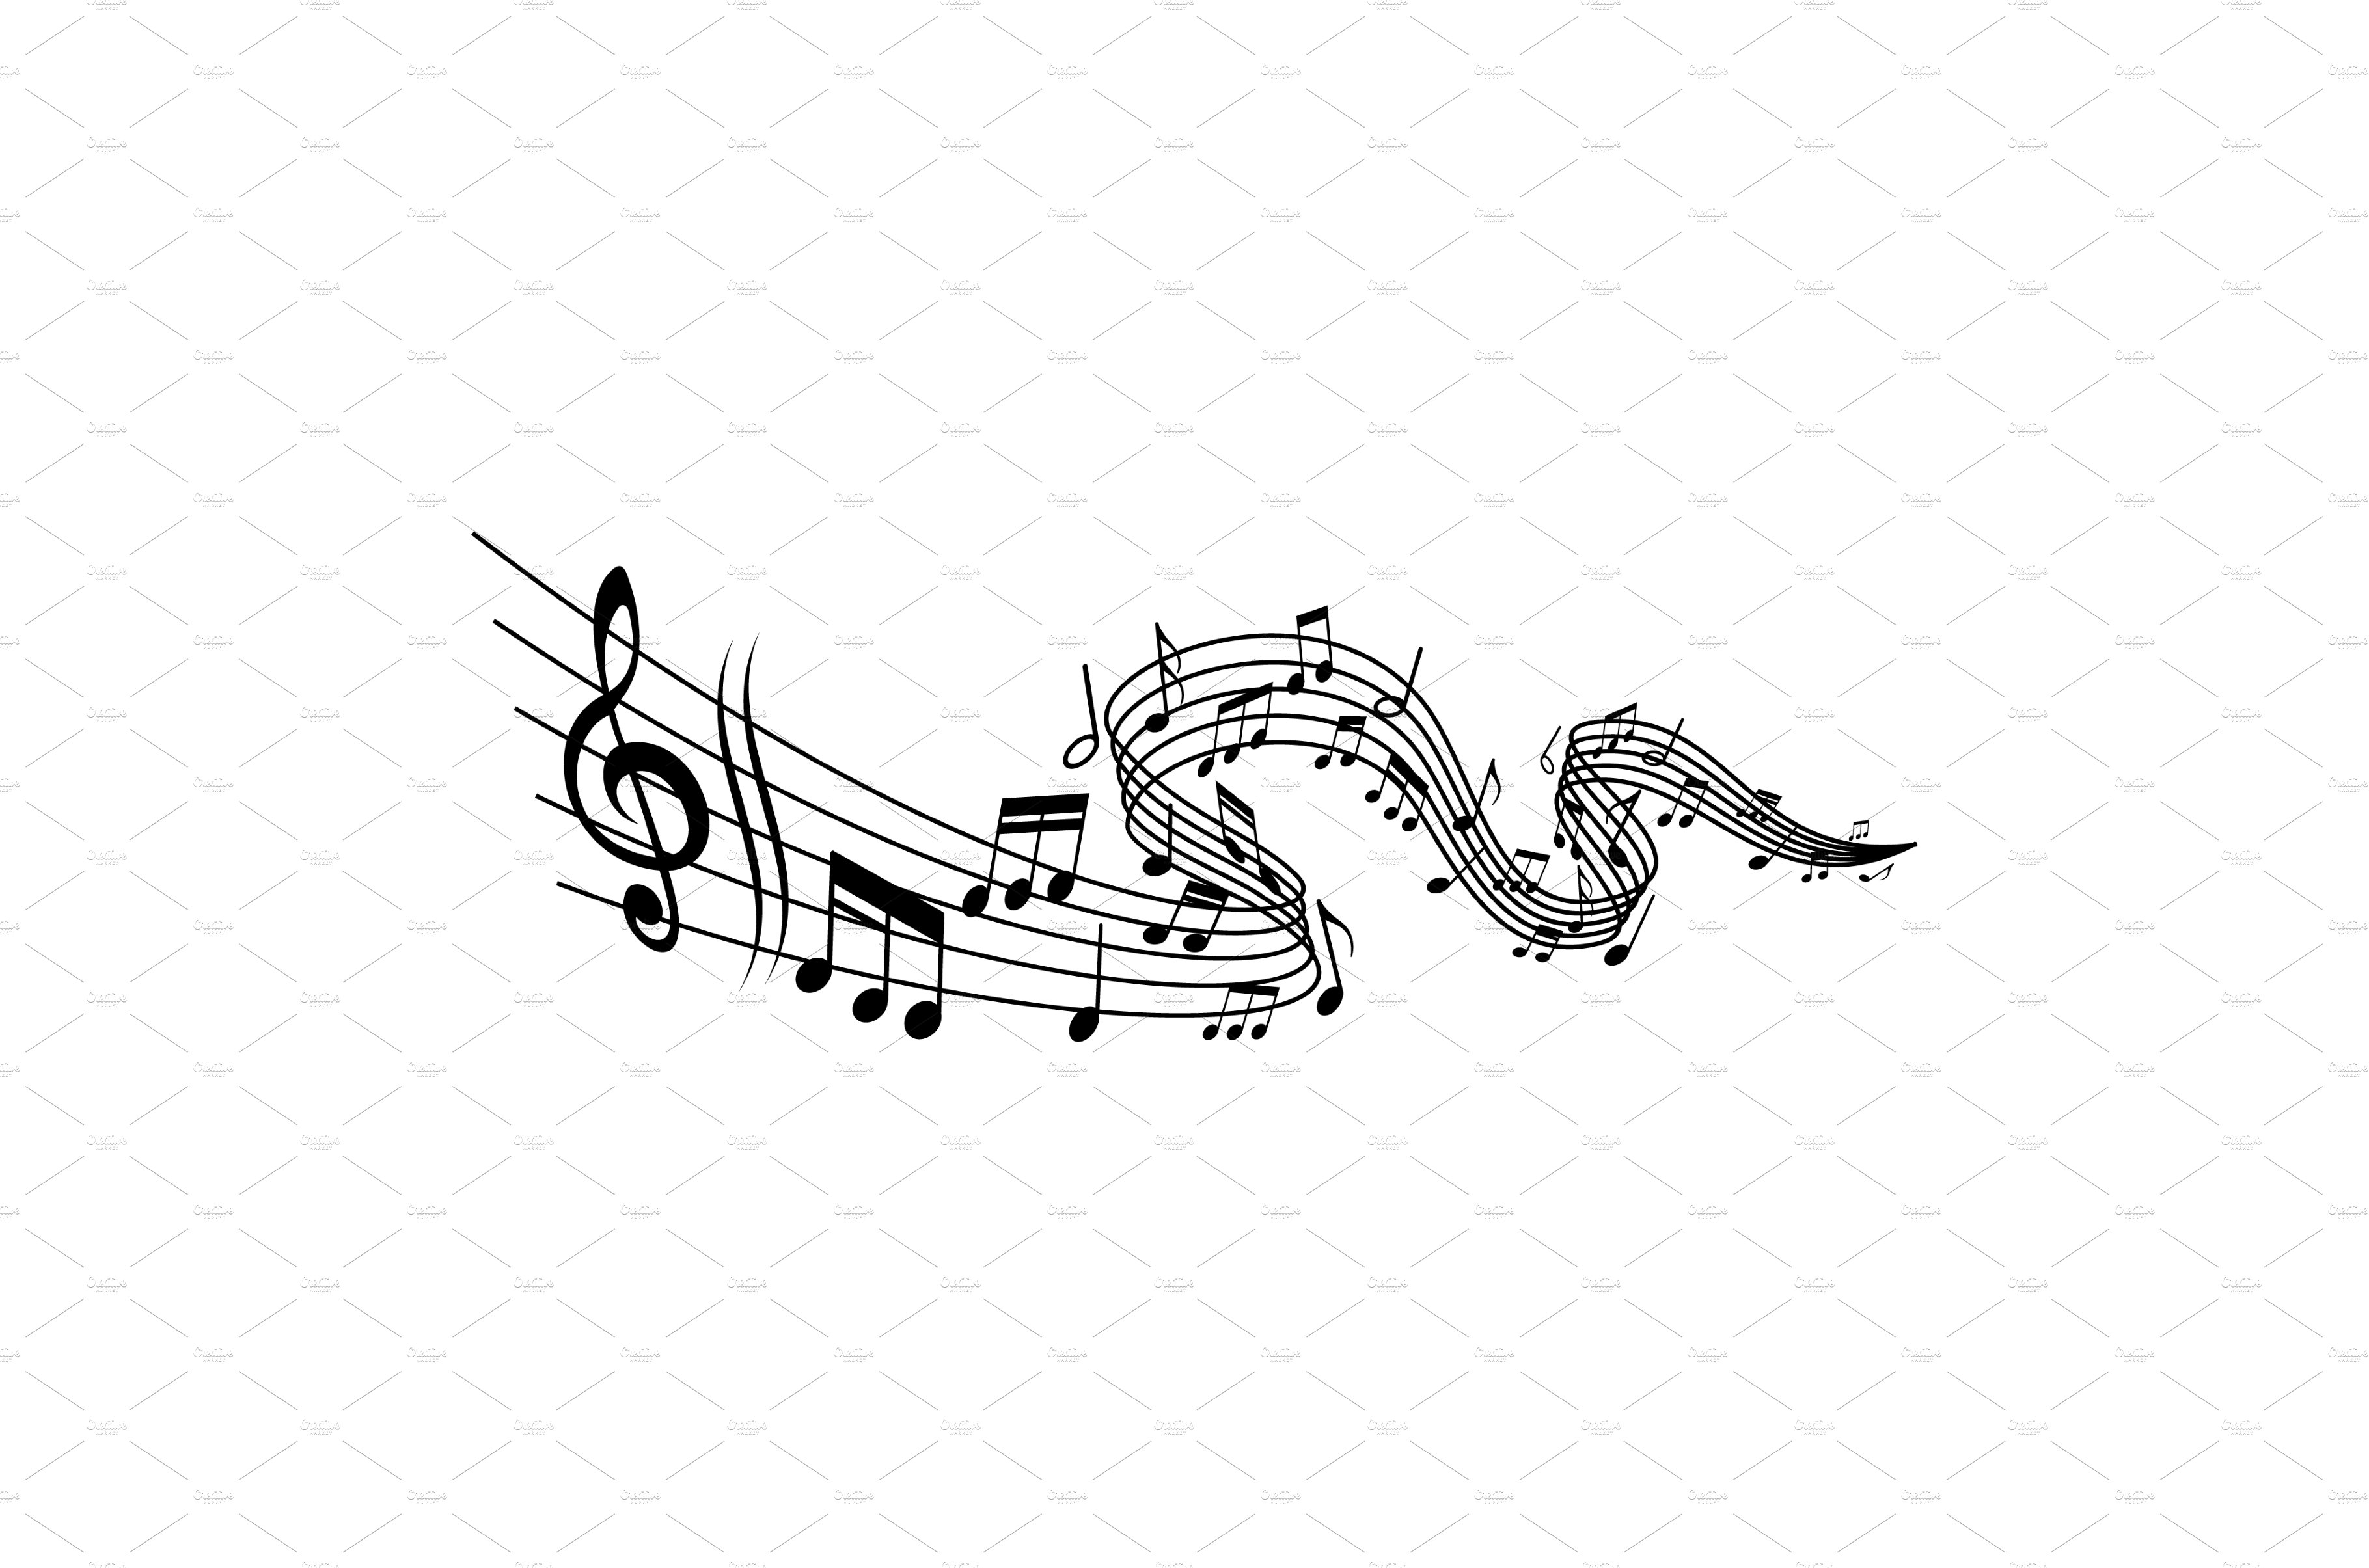 Melody wave, music notes cover image.